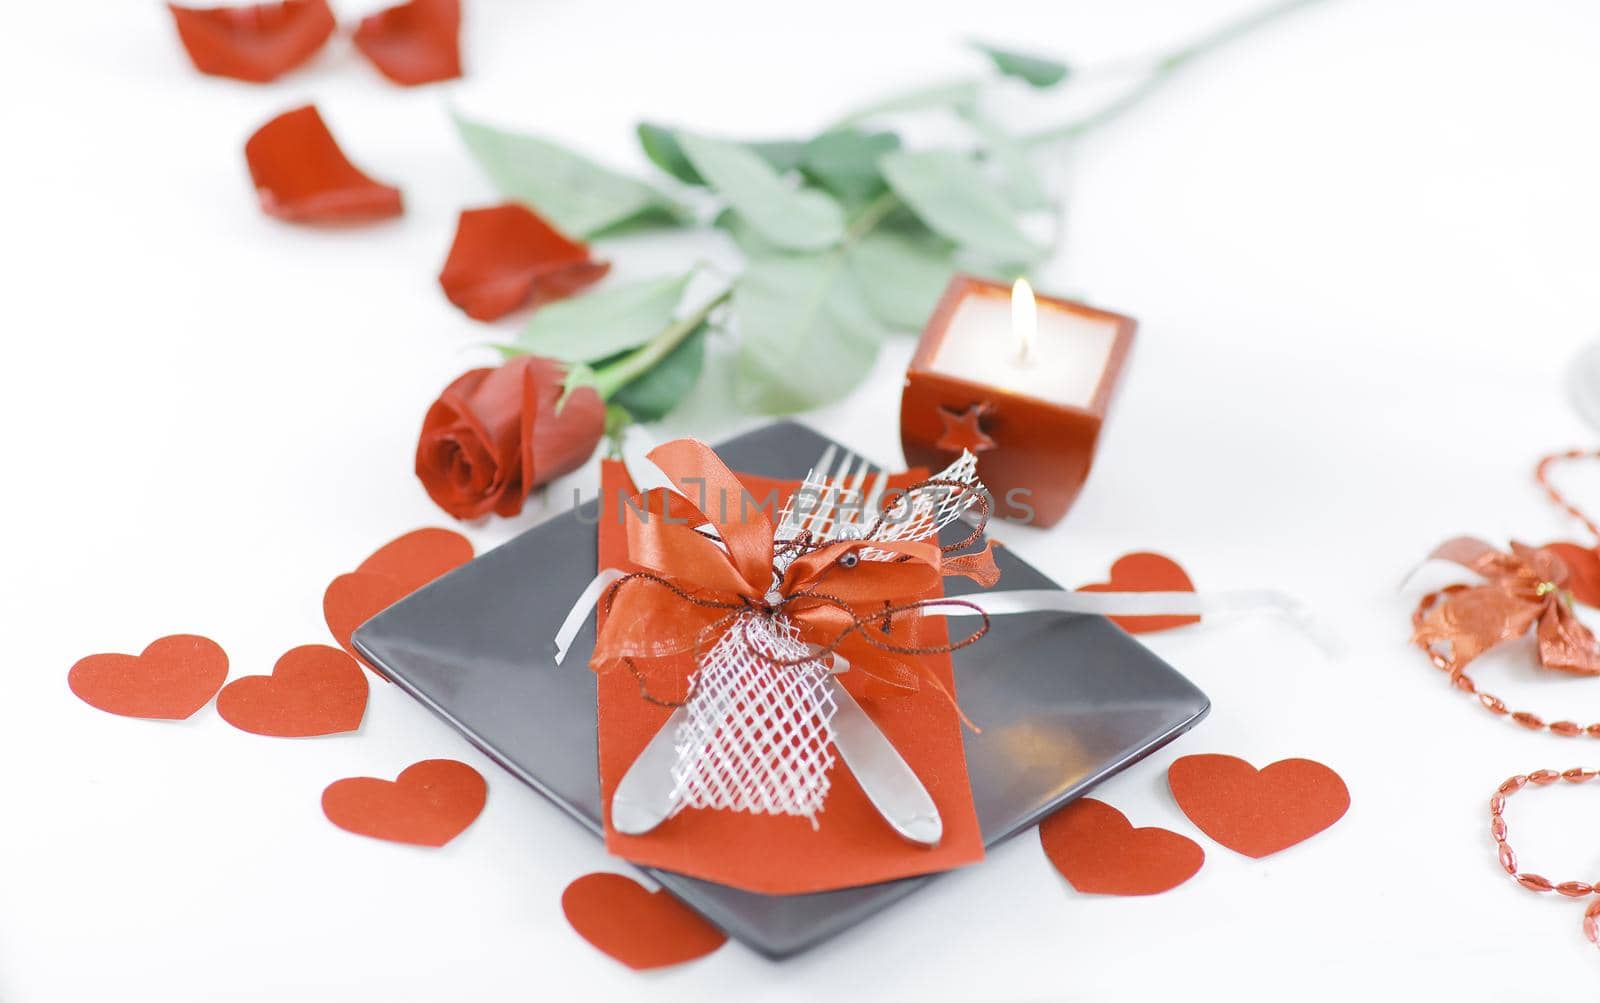 red rose and Valentine's day gift box. photo with copy space.